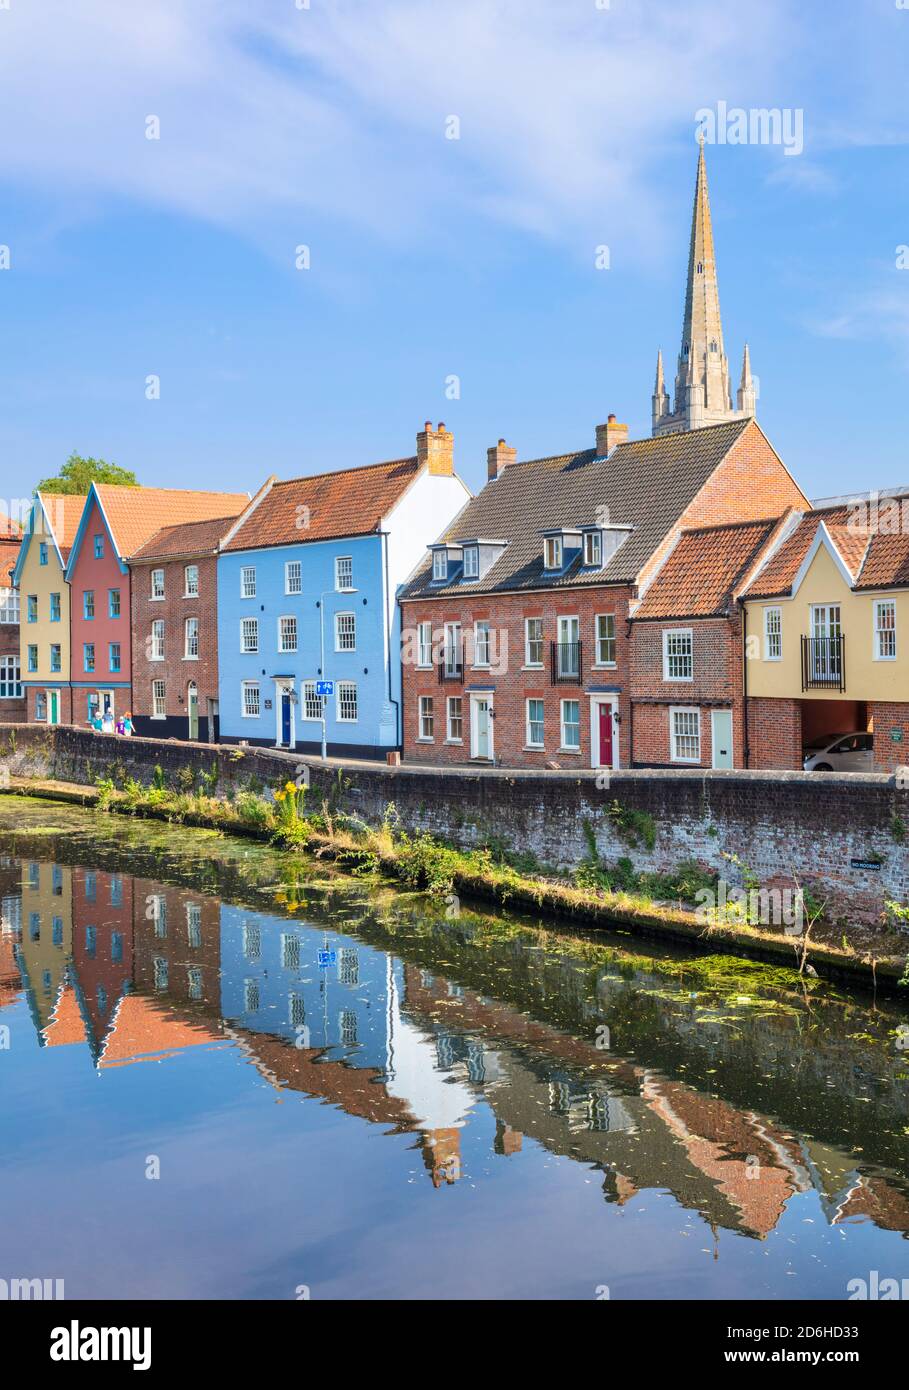 Narrow street Quayside and bright painted  terraced houses by the Norwich river Wensum Norwich Norfolk East Anglia England UK GB Europe Stock Photo